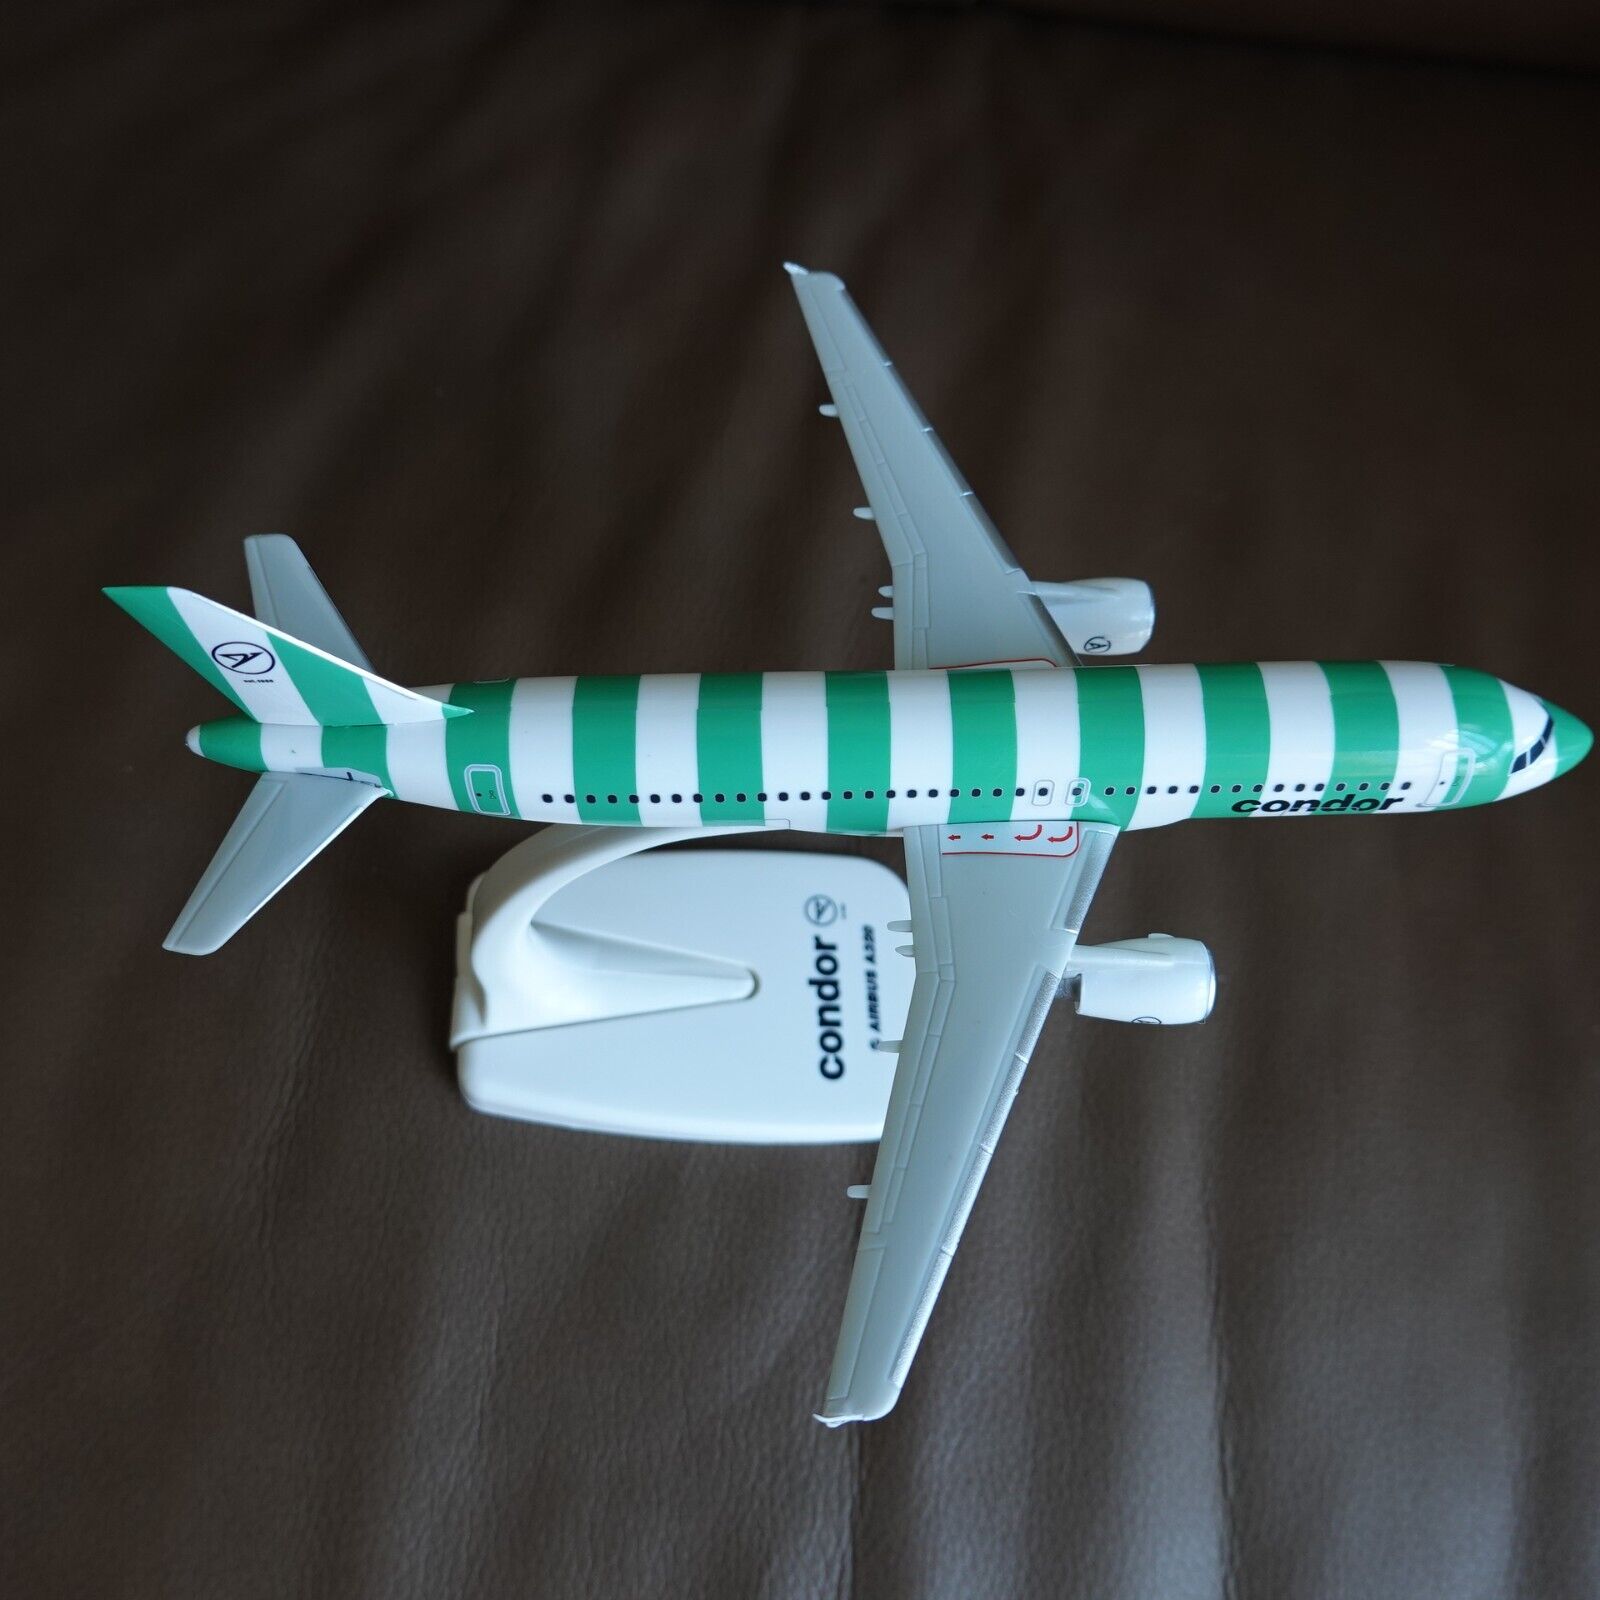 1/200 Condor Airbus A320-200 Airplane Model New Color - Green